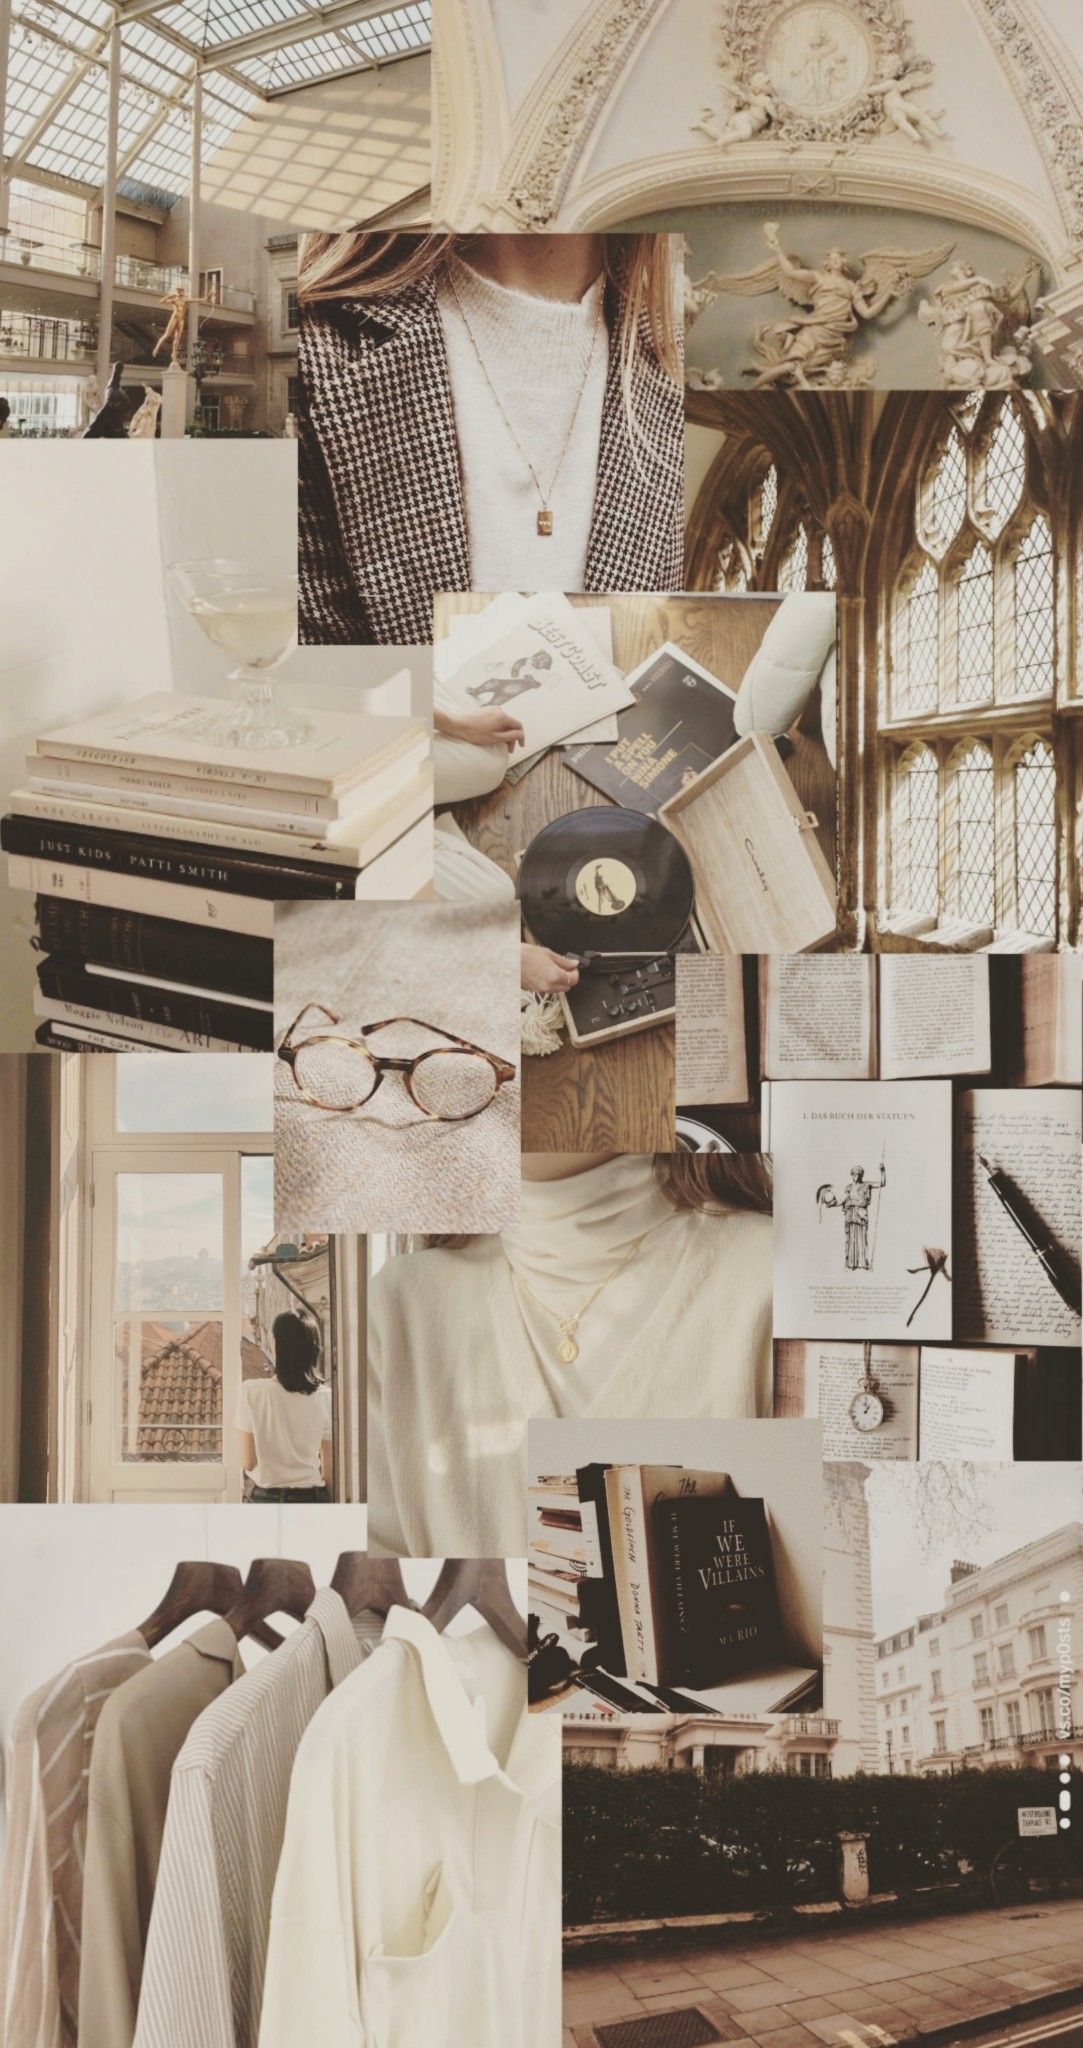 Aesthetic collage of white and black images of a woman, books, and other items. - Light academia